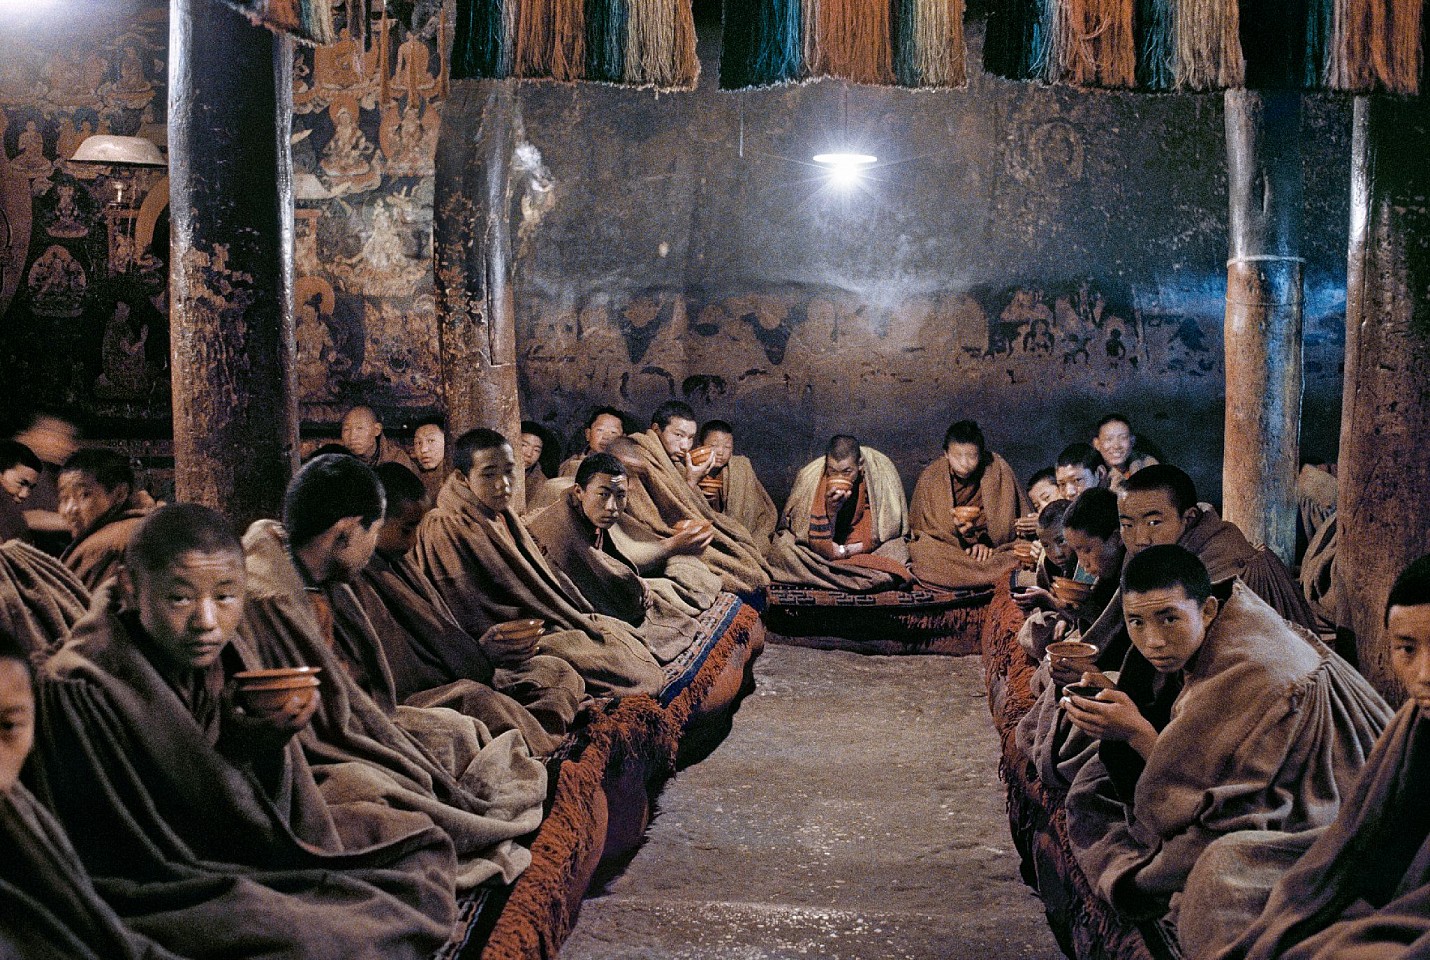 Steve McCurry, Young Tibetan Monks, 1989
FujiFlex Crystal Archive Print
Price/Size on request